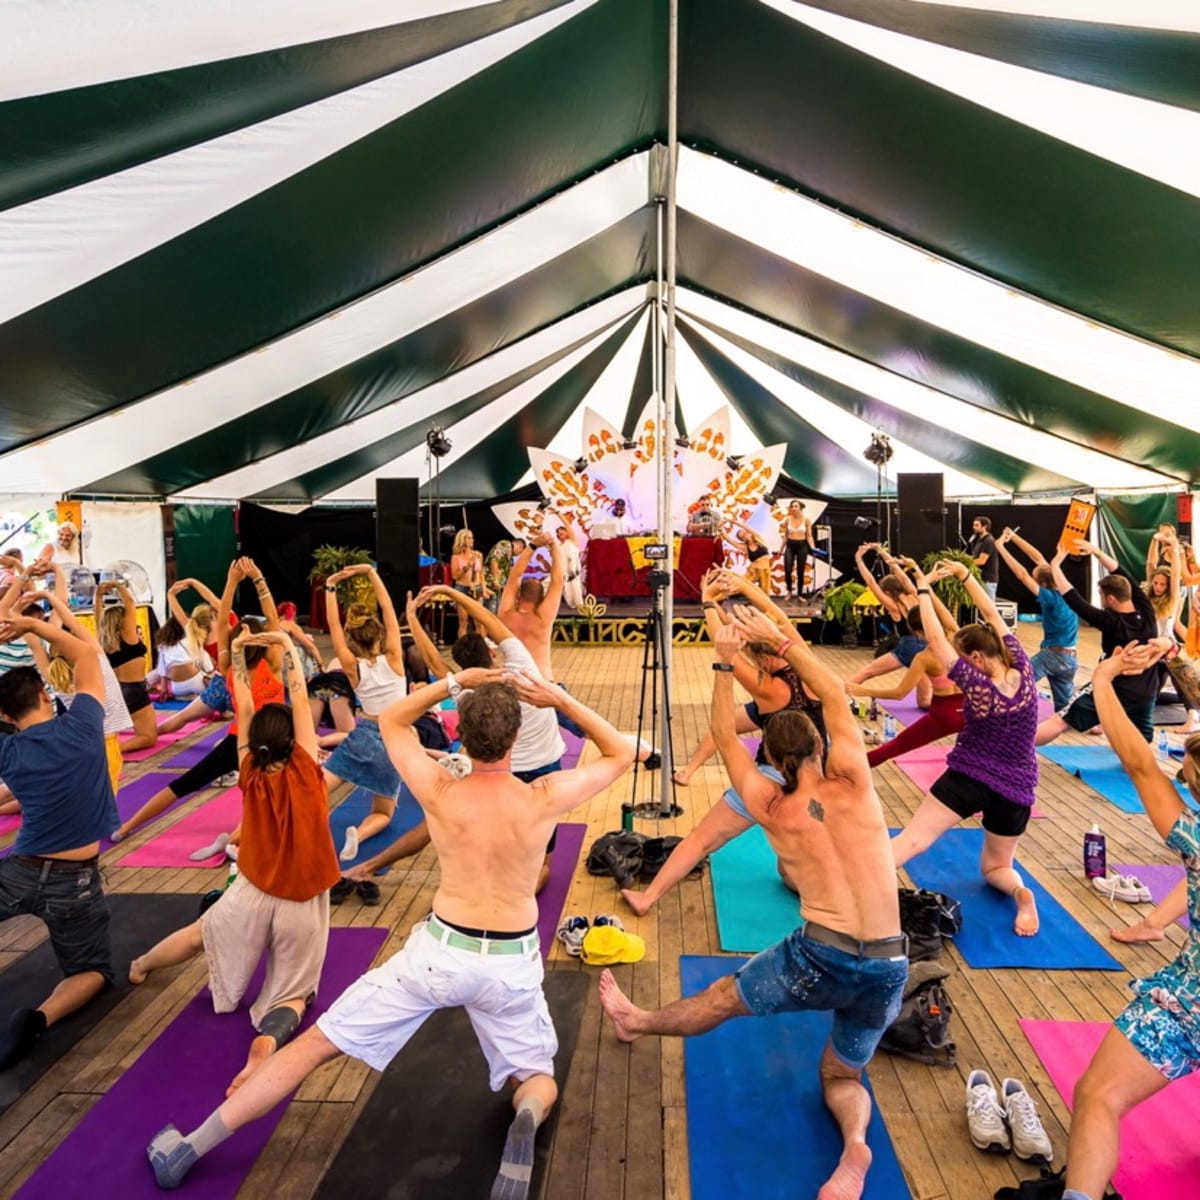 A New 3-Day Yoga and Electronic Music Festival Is Coming to Colorado -   - The Latest Electronic Dance Music News, Reviews & Artists